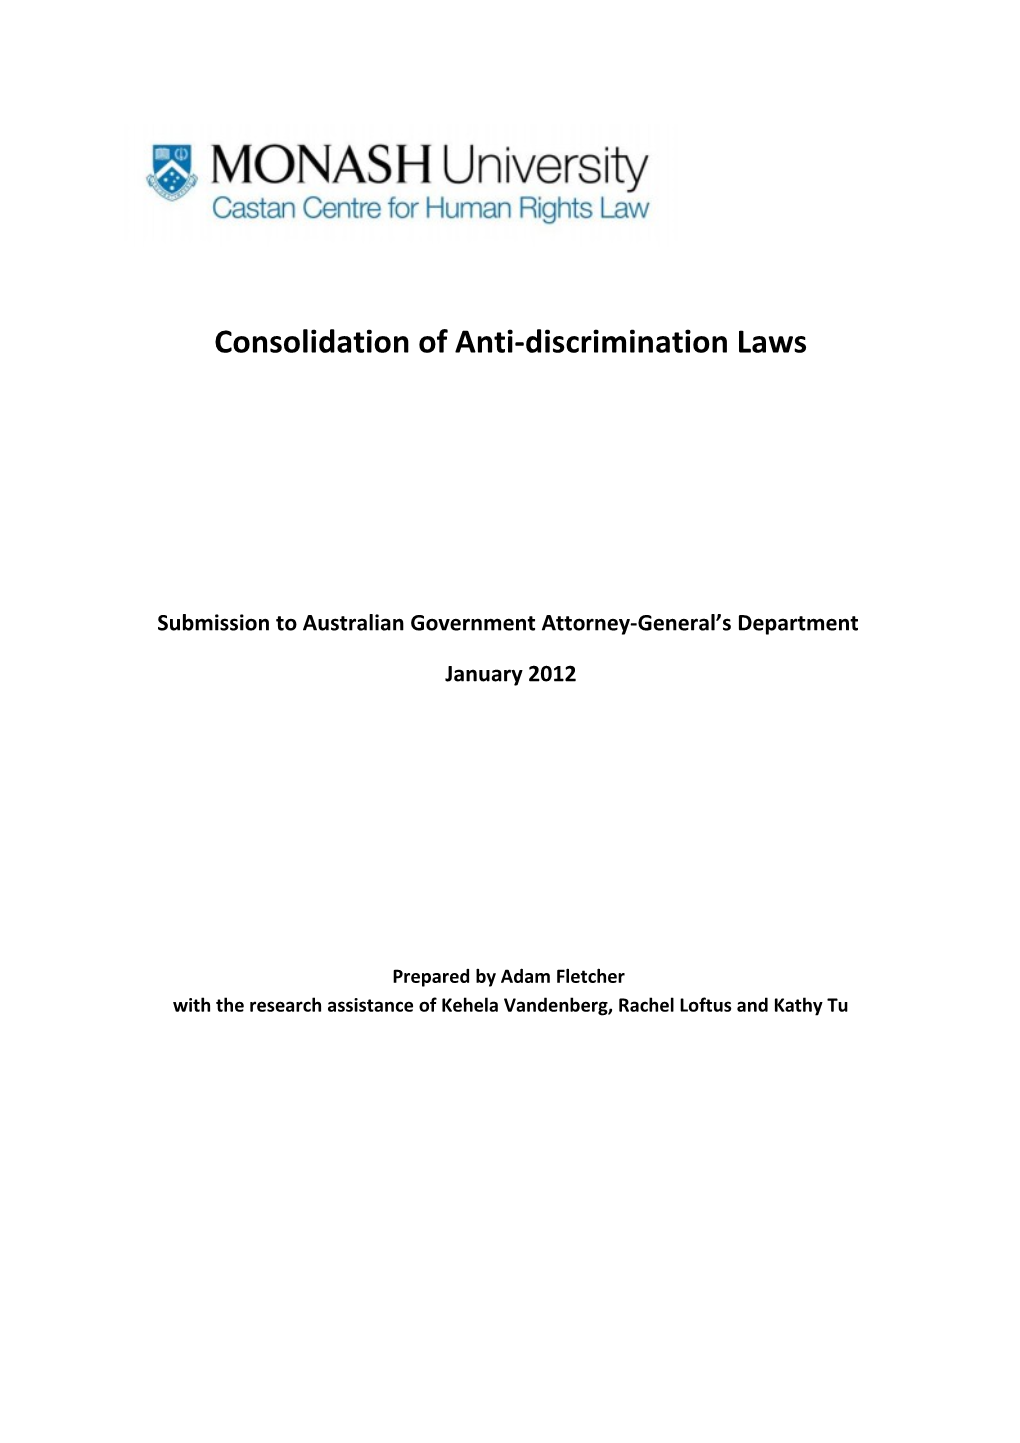 Submission on the Consolidation of Commonwealth Anti-Discrimination Laws - Castan Centre